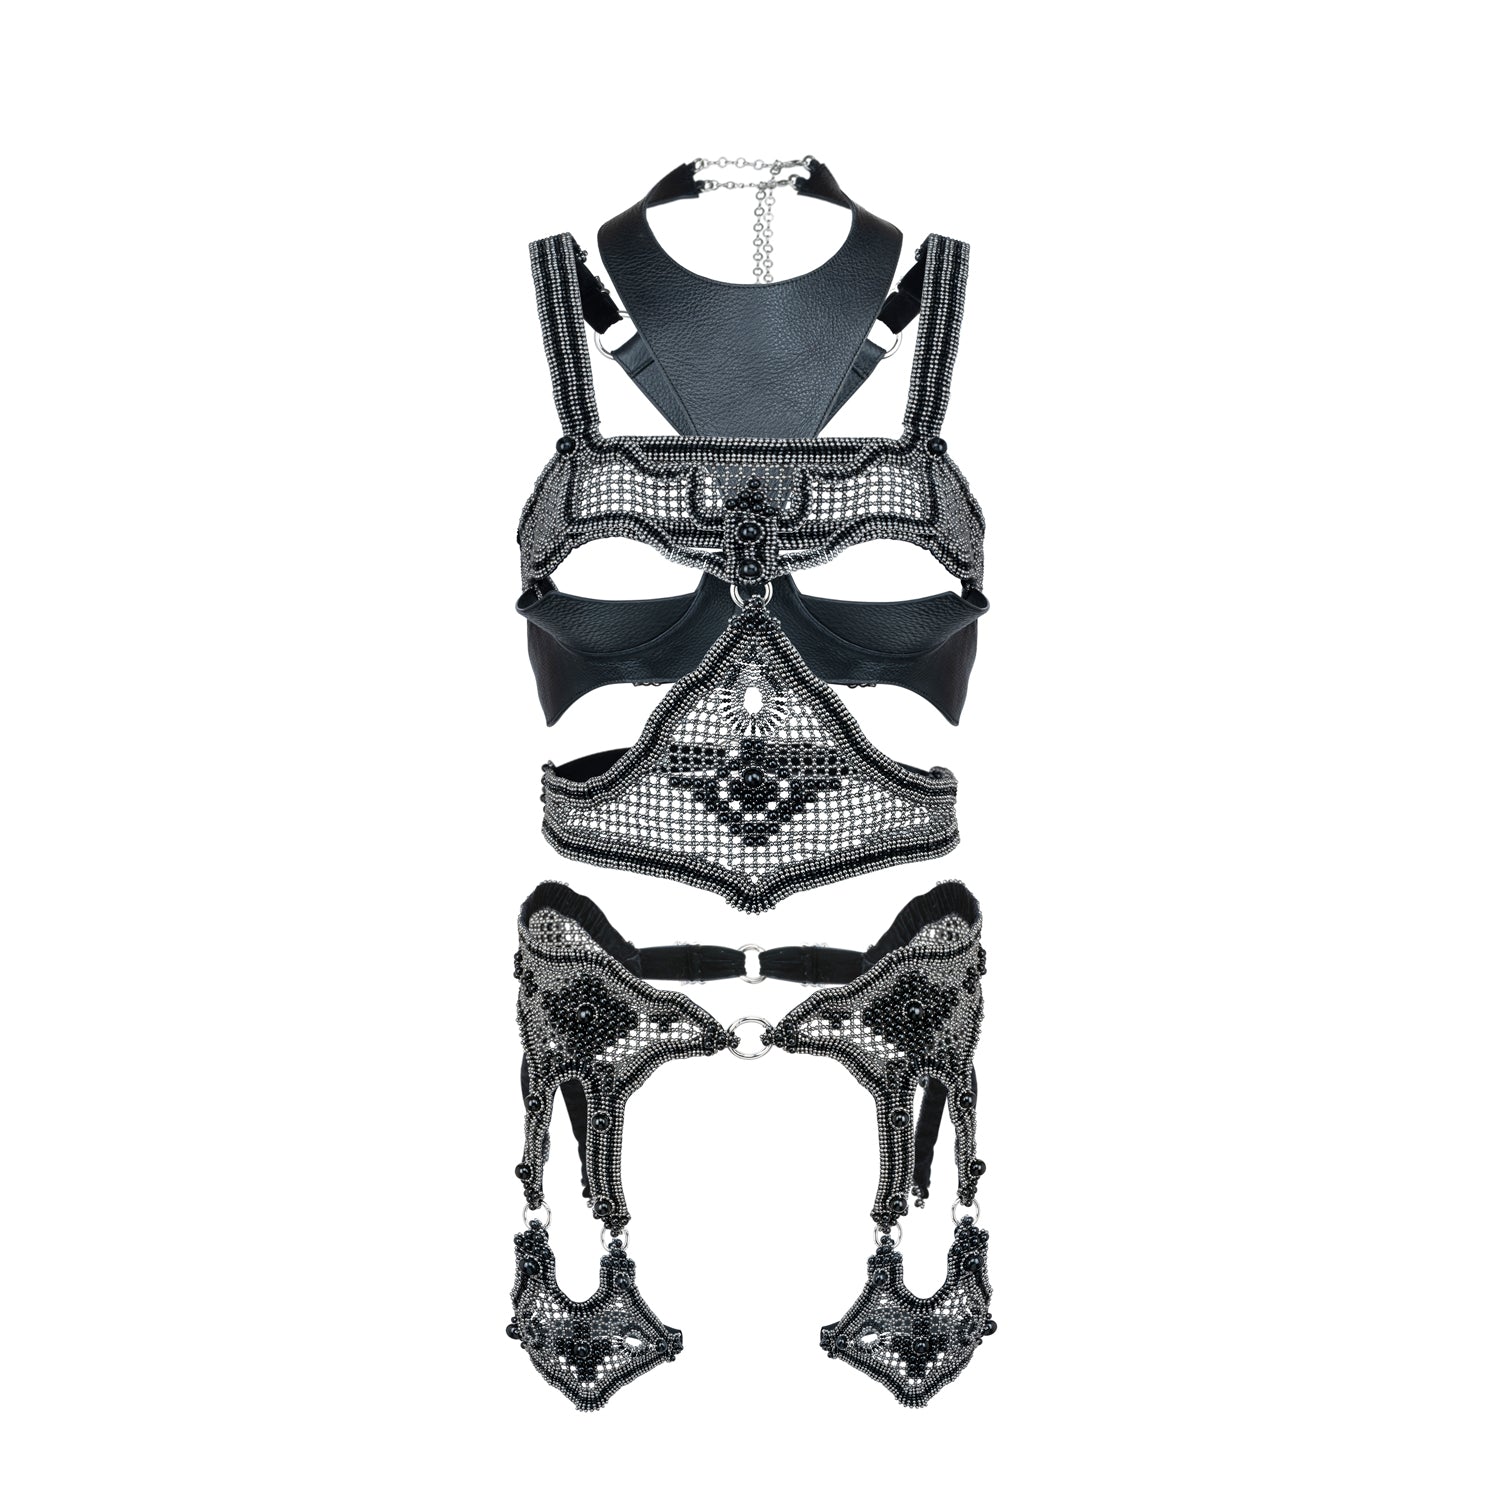 Khutulun Complete Body System in Jet Black